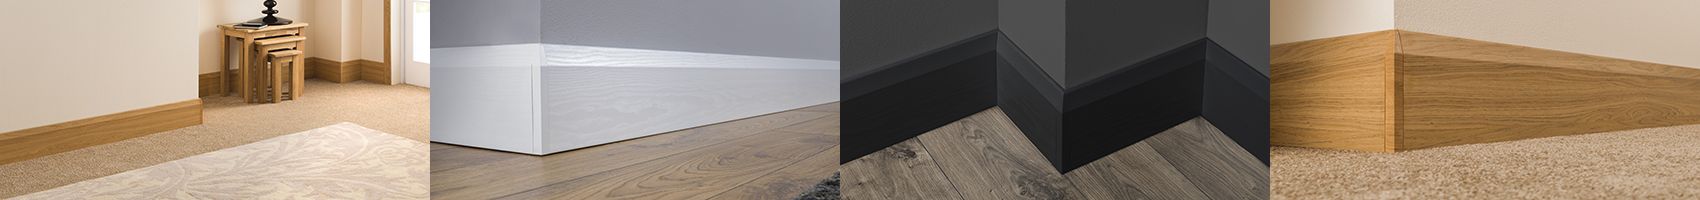 100mm Anthracite Ogee Roomline Skirting Board 5m